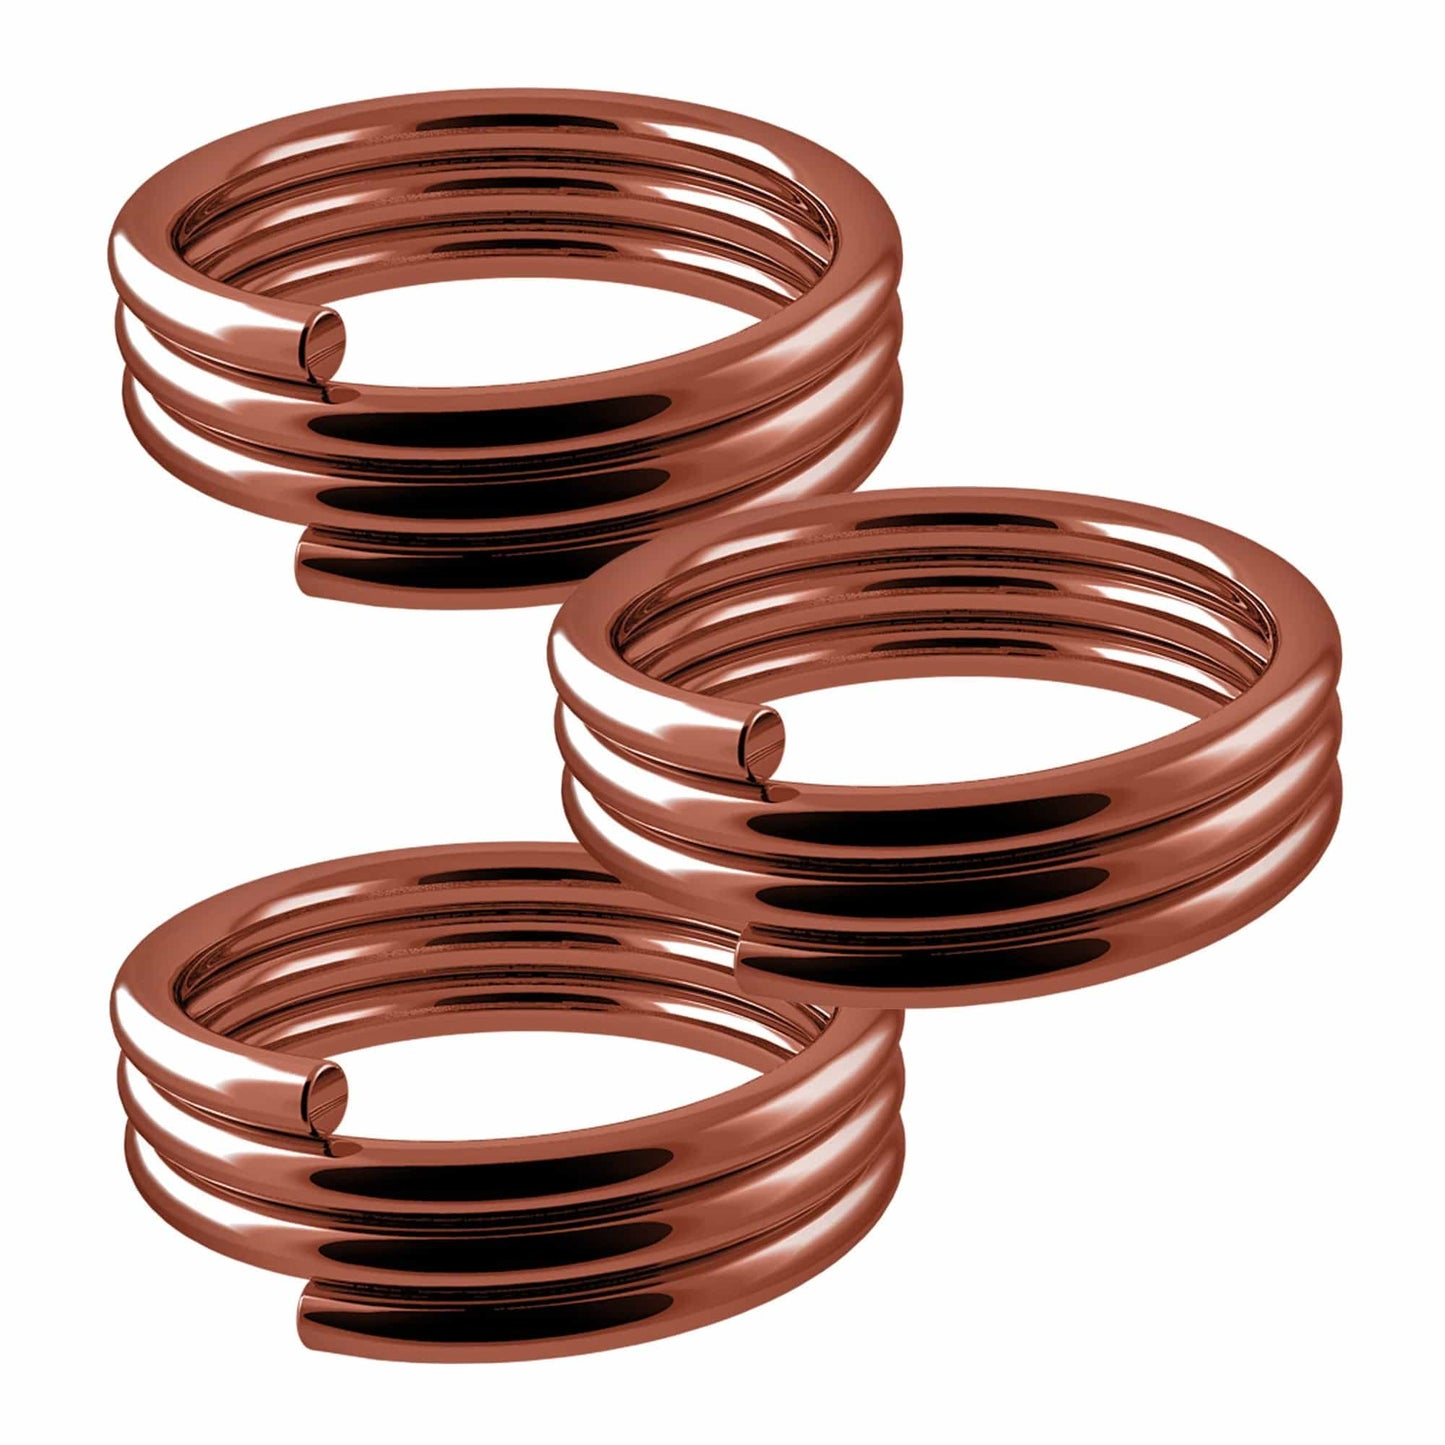 Designa Springs - for use with Nylon Shafts - 10 Sets (30) Bronze